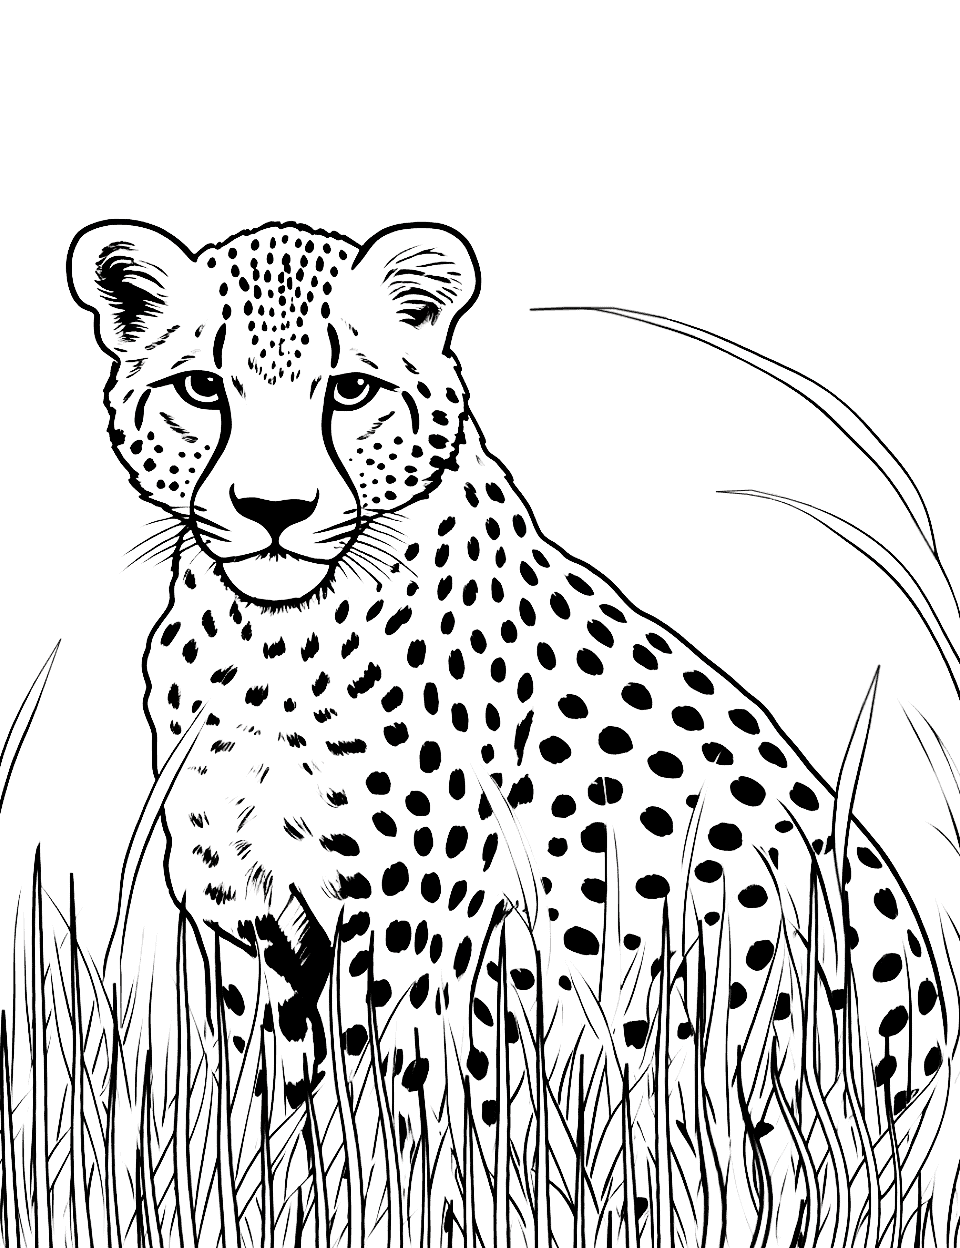 Realistic Cheetah in Grass Coloring Page - A lifelike depiction of a cheetah hiding in tall savannah grass.